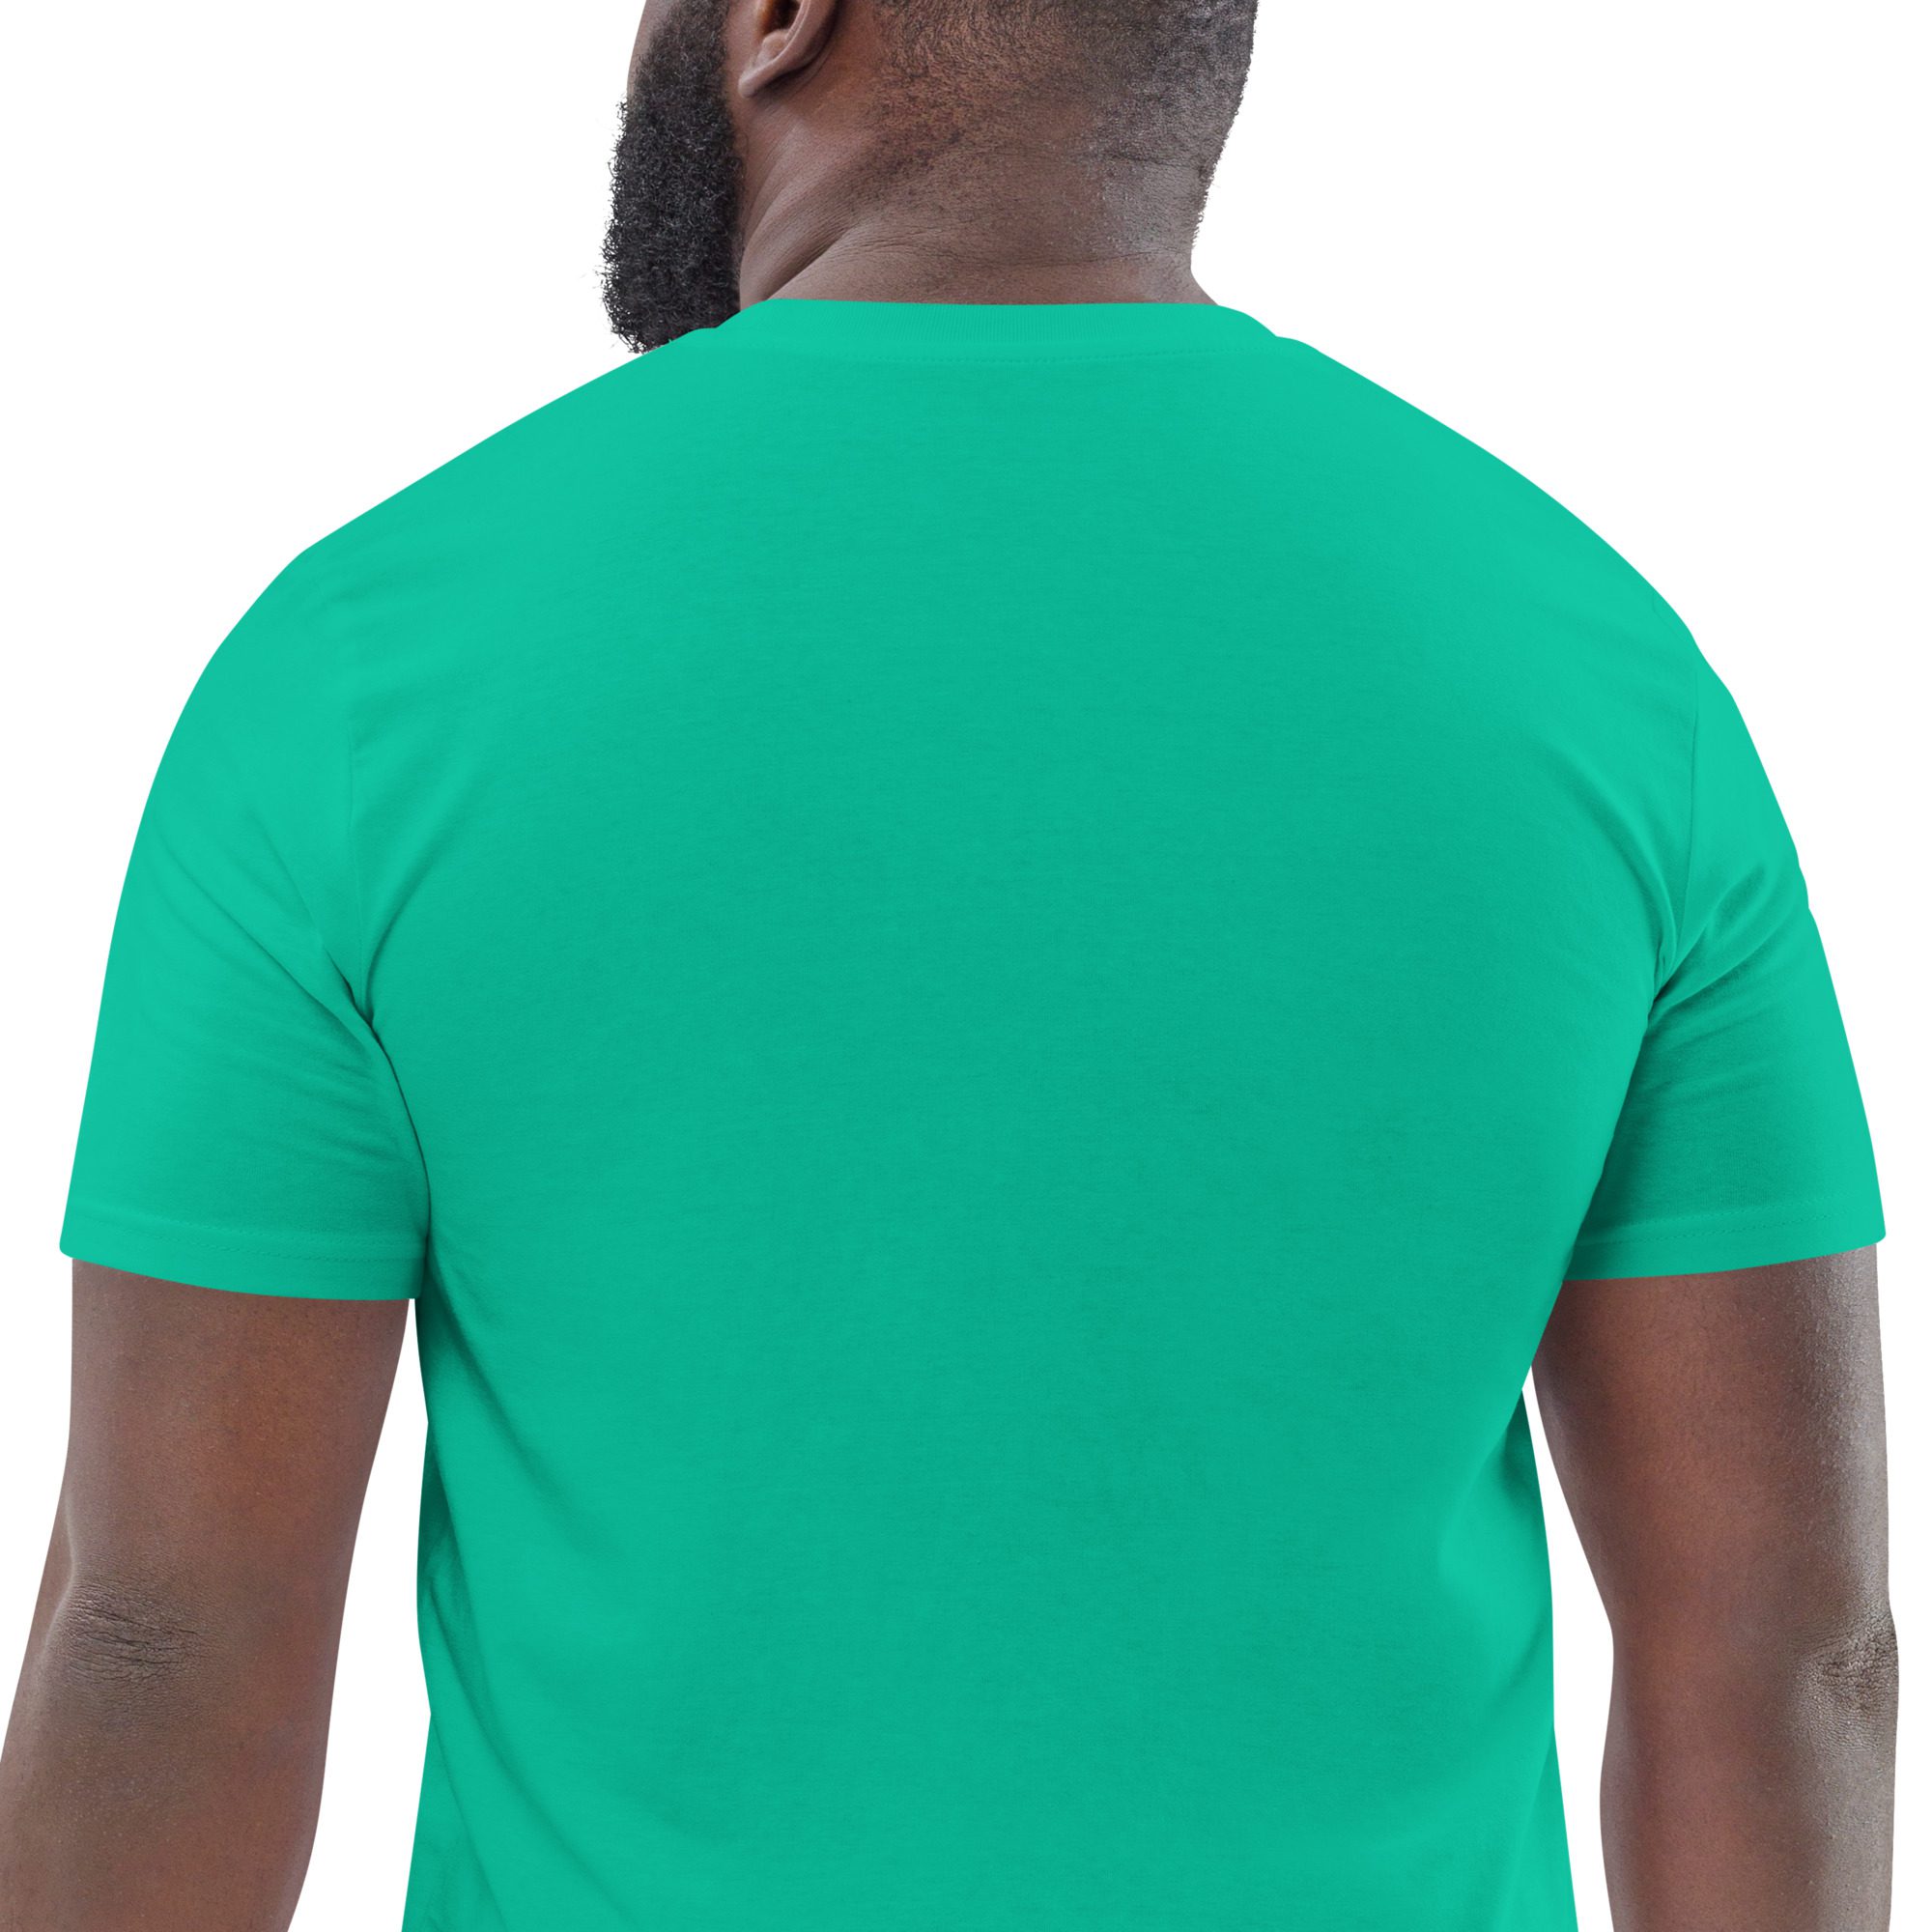 unisex organic cotton t shirt go green zoomed in 651ada9397001